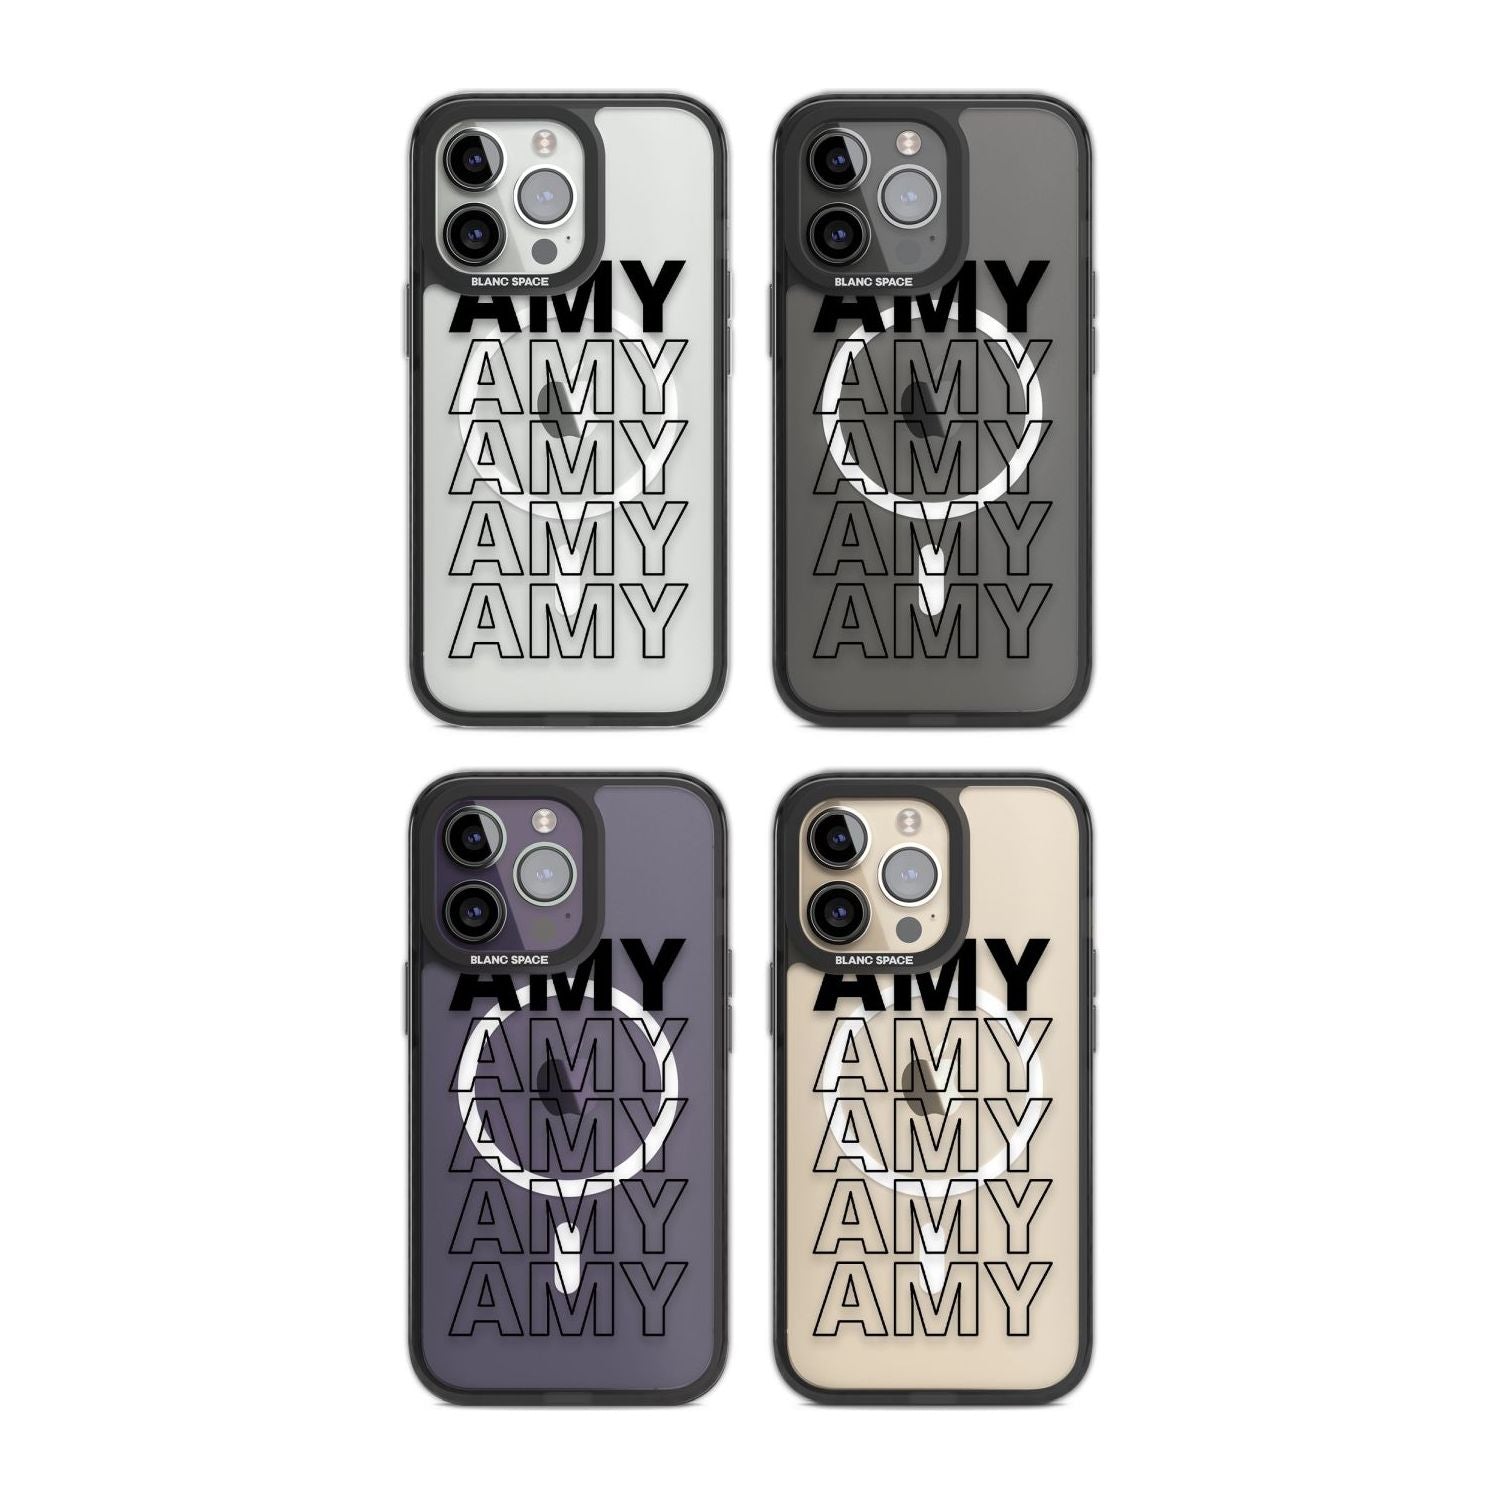 Personalised Clear Text  5A Custom Phone Case iPhone 15 Pro Max / Black Impact Case,iPhone 15 Plus / Black Impact Case,iPhone 15 Pro / Black Impact Case,iPhone 15 / Black Impact Case,iPhone 15 Pro Max / Impact Case,iPhone 15 Plus / Impact Case,iPhone 15 Pro / Impact Case,iPhone 15 / Impact Case,iPhone 15 Pro Max / Magsafe Black Impact Case,iPhone 15 Plus / Magsafe Black Impact Case,iPhone 15 Pro / Magsafe Black Impact Case,iPhone 15 / Magsafe Black Impact Case,iPhone 14 Pro Max / Black Impact Case,iPhone 14